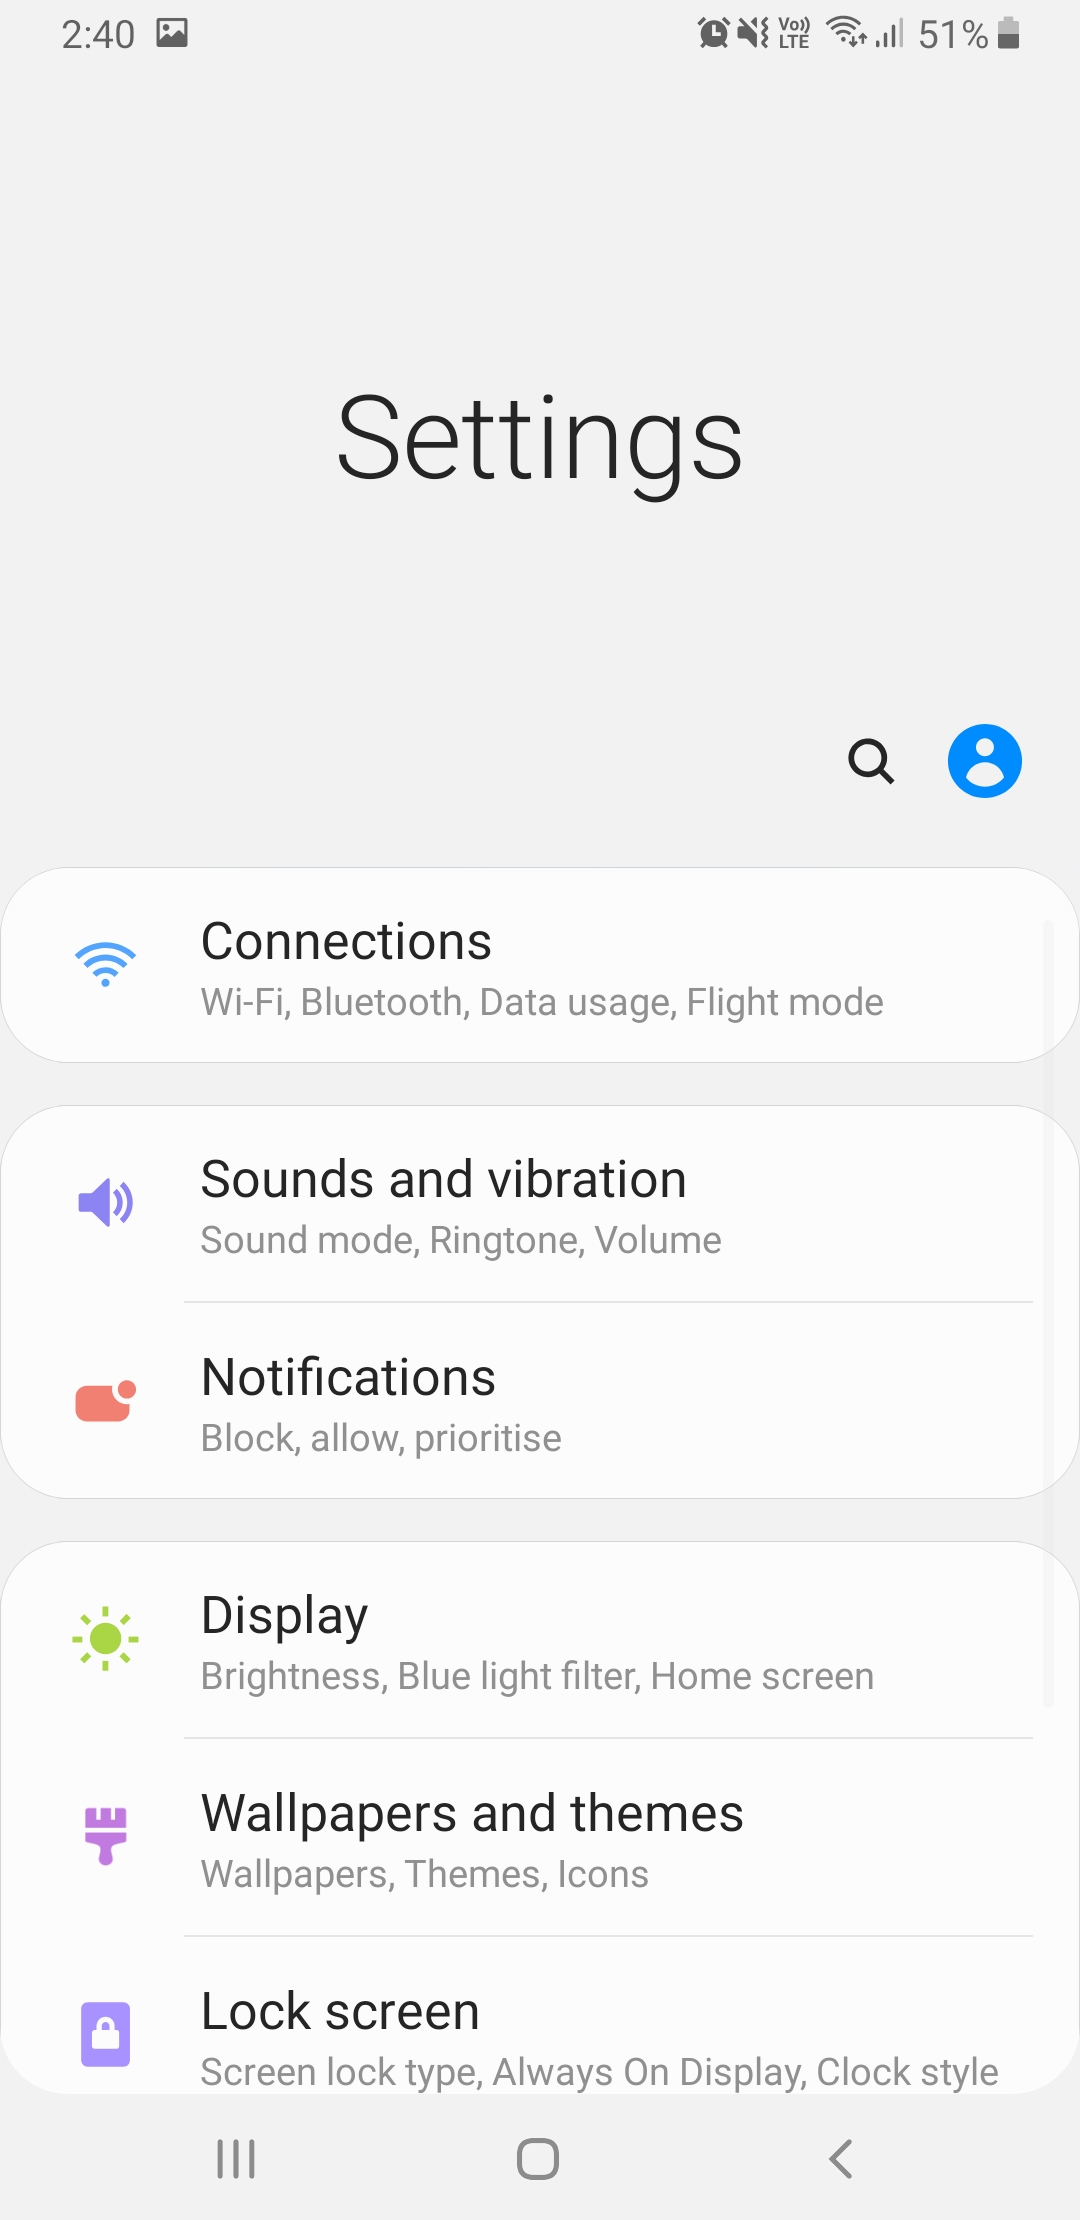 Hotspot Maker 2.9 for android download